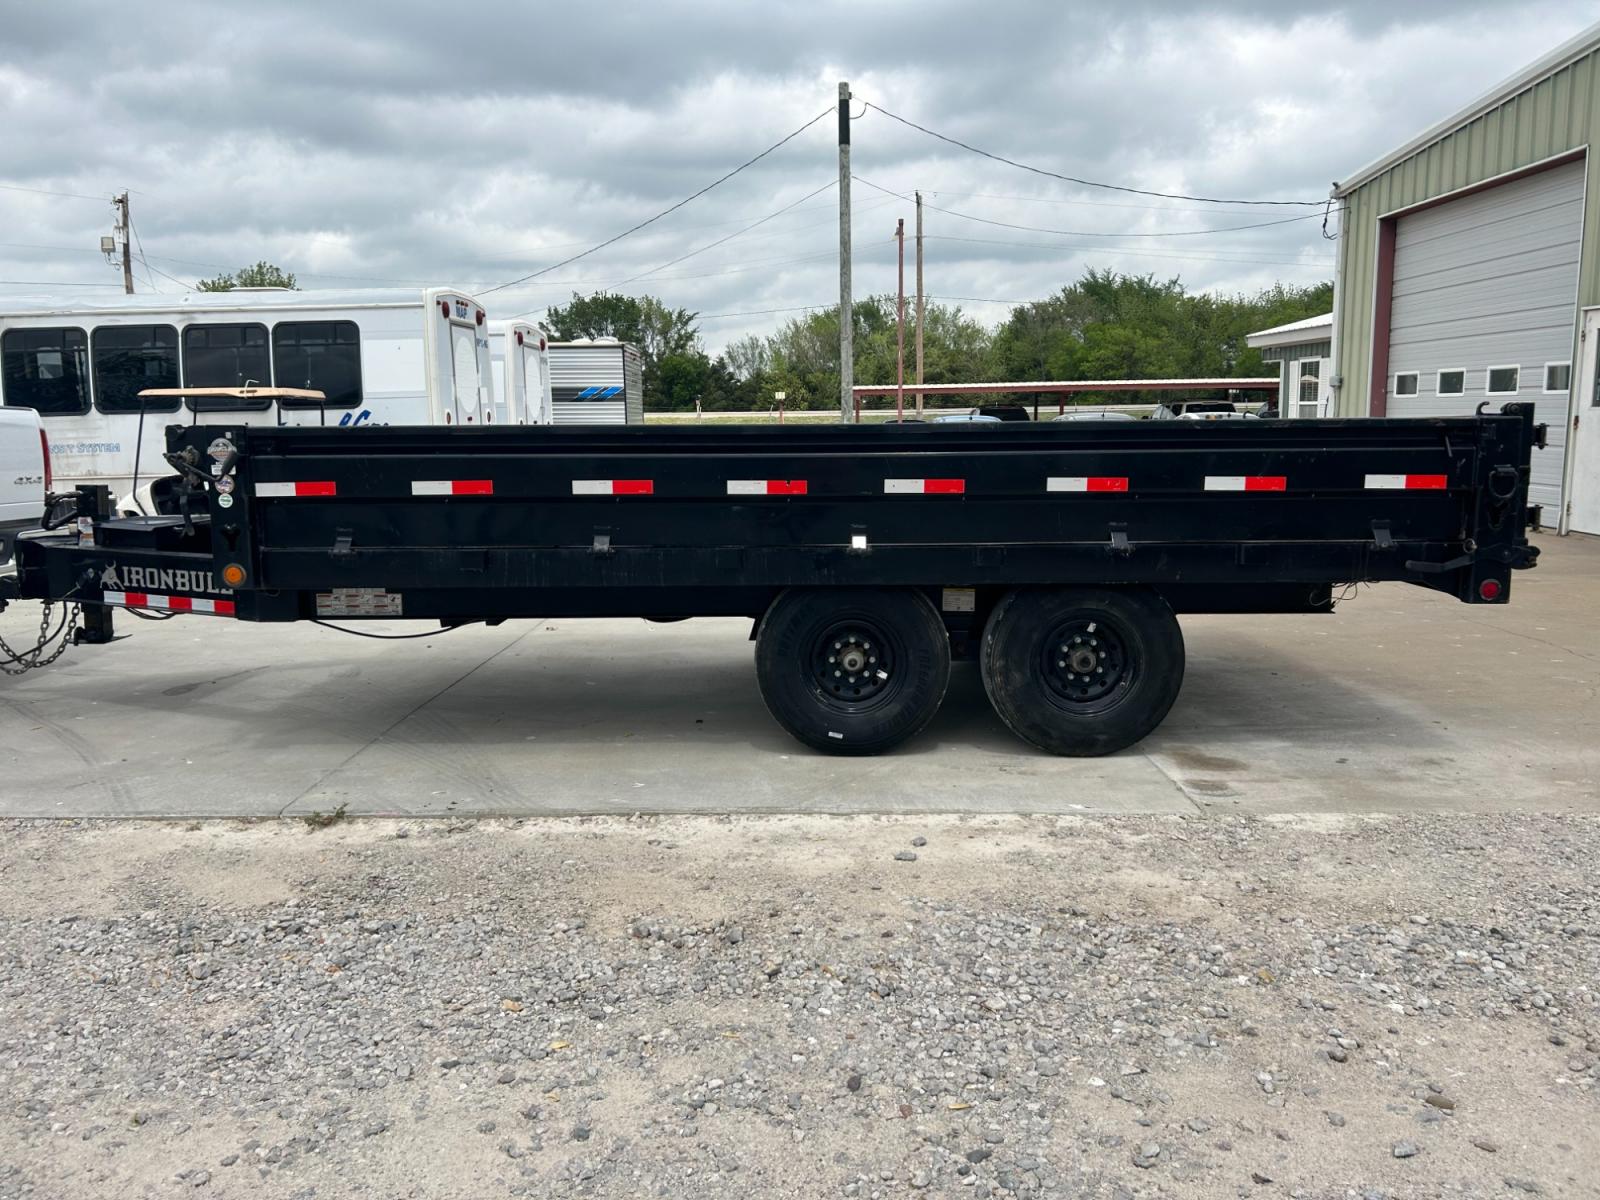 2022 BLACK IRONBULL DUMP TRAILER DUMPBED (50HDP1620N1) , located at 17760 Hwy 62, Morris, OK, 74445, 35.609104, -95.877060 - 2022 deckover dumps offer a raised deck (above the tires) to accommodate 10 gauge fold down sides and a bed width of 96”. The deckover is equipped standard with 10” I beam frame. 3” channel crossmembers span the 10 gauge smooth steel floor. 2 5/16” couplers are equipped standard on each mode - Photo #5